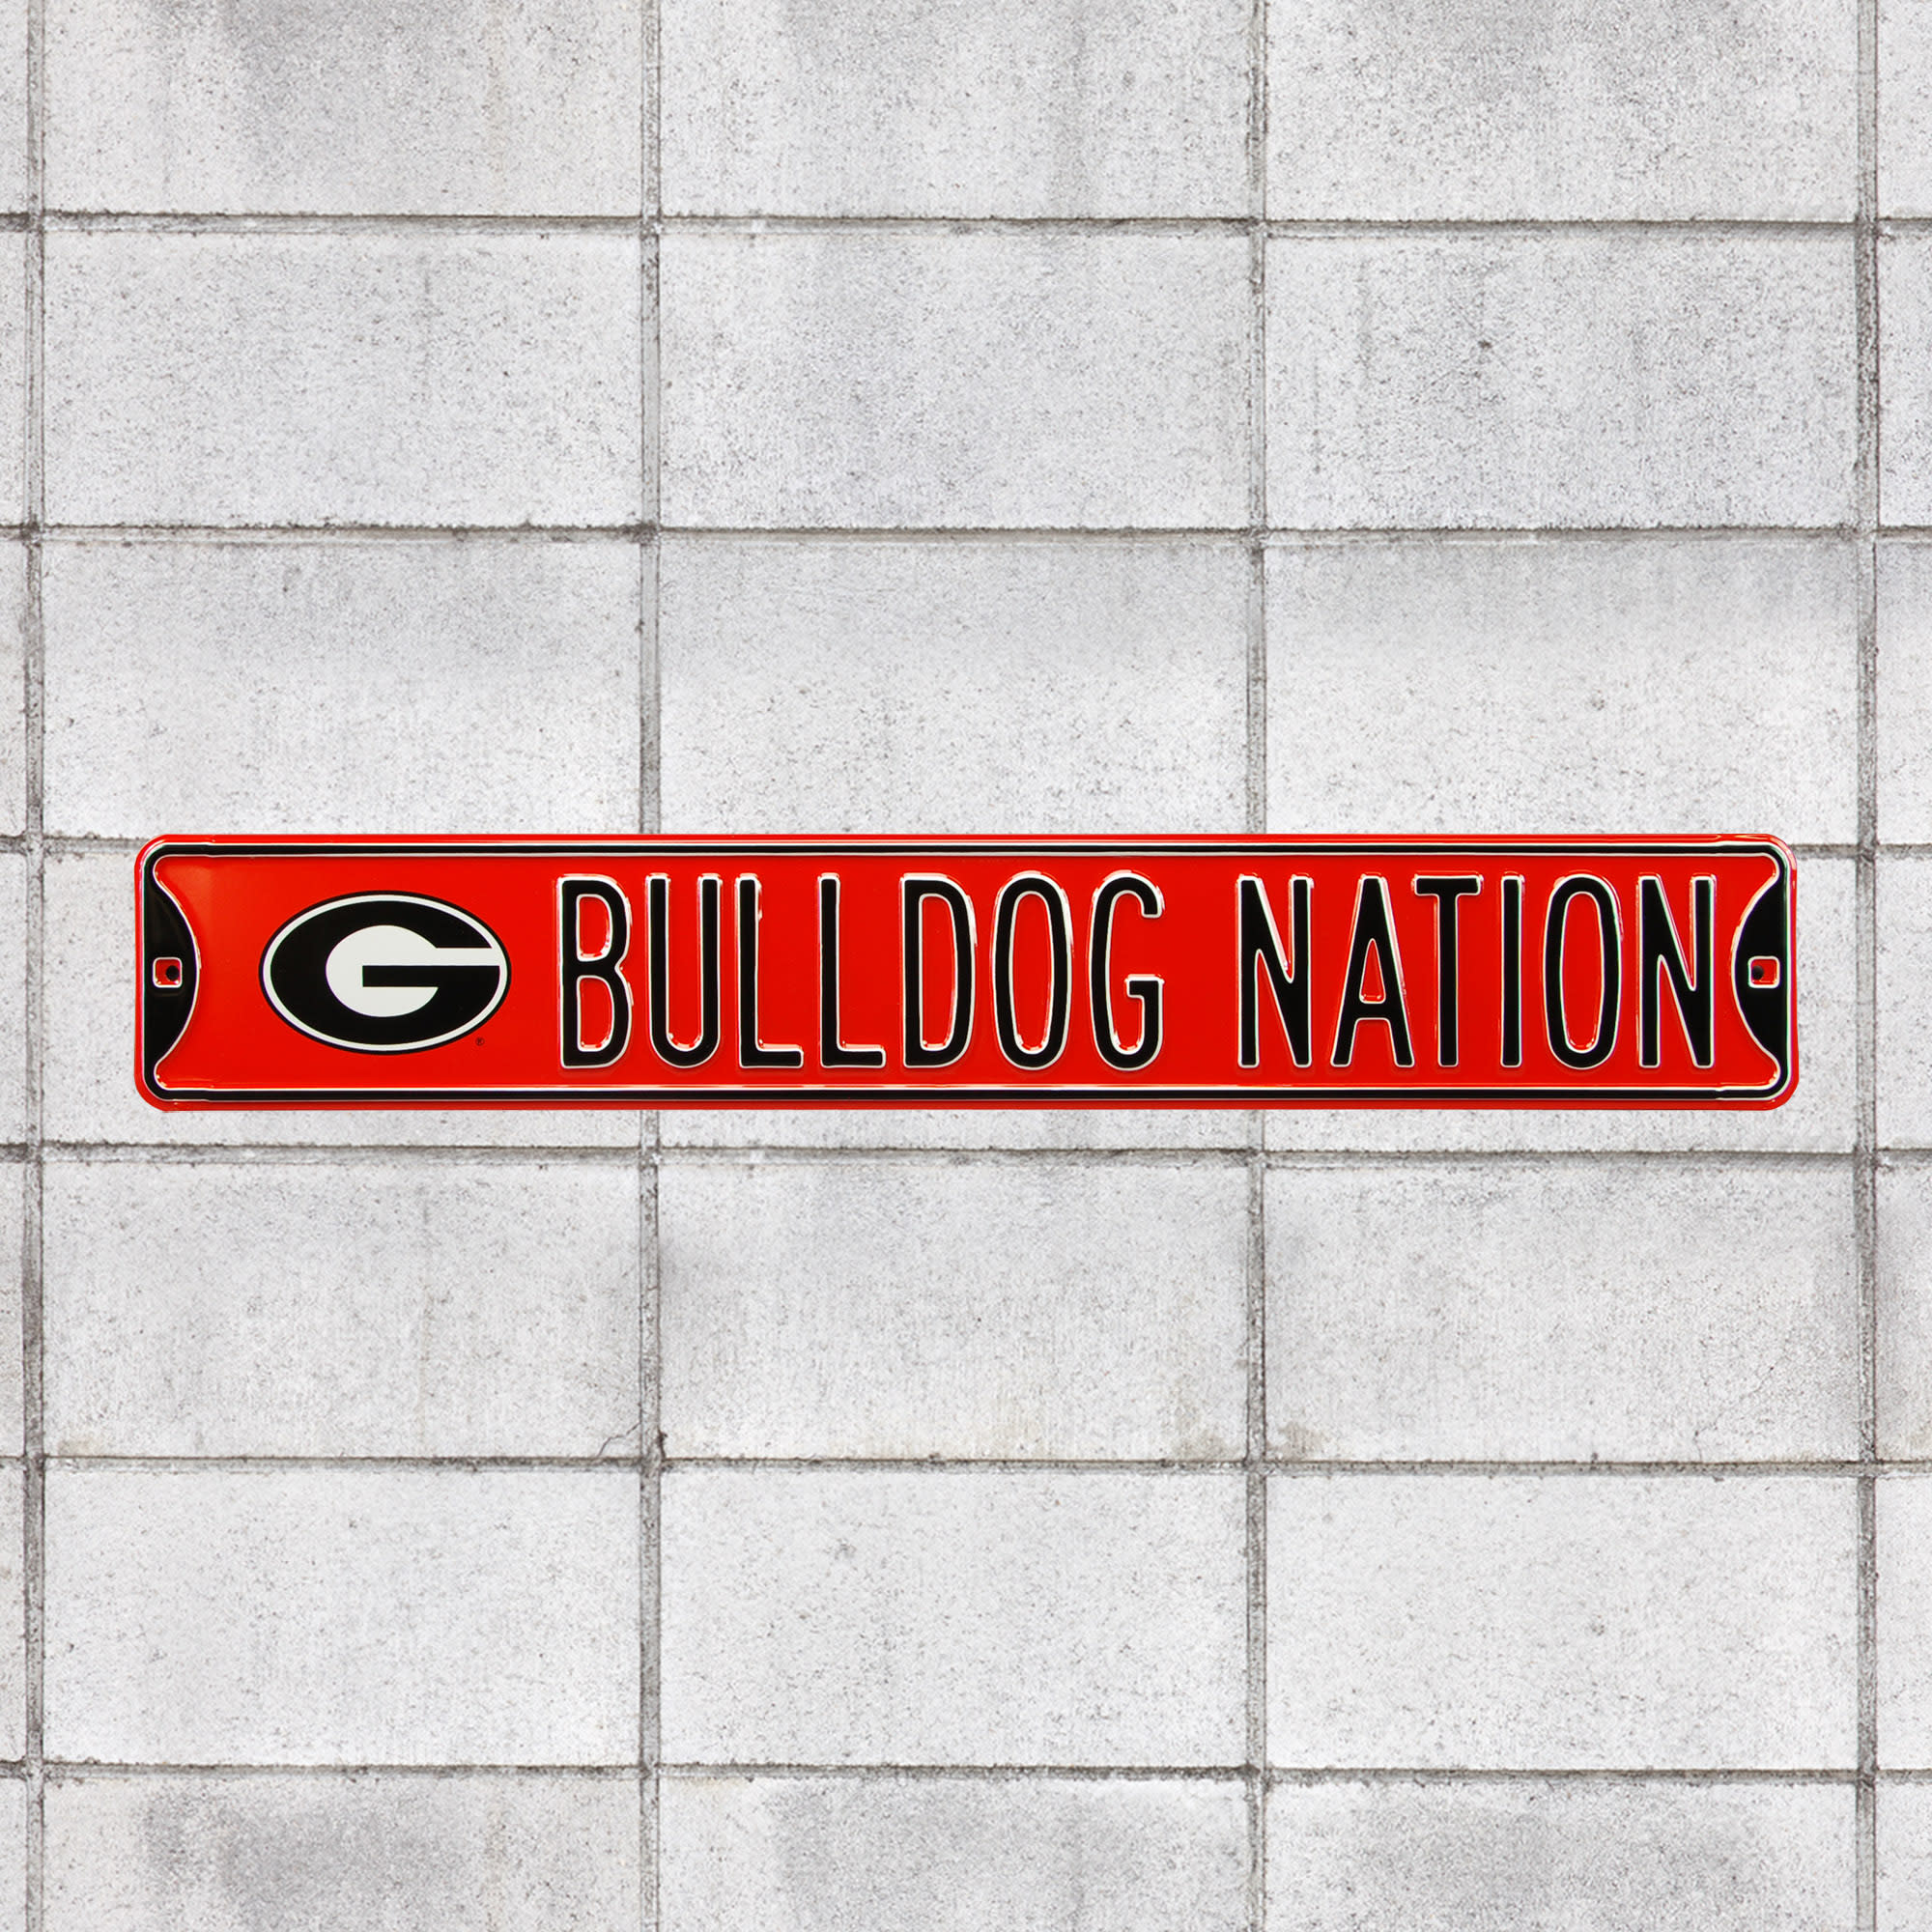 Georgia Bulldogs: Bulldog Nation - Officially Licensed Metal Street Sign 36.0"W x 6.0"H by Fathead | 100% Steel